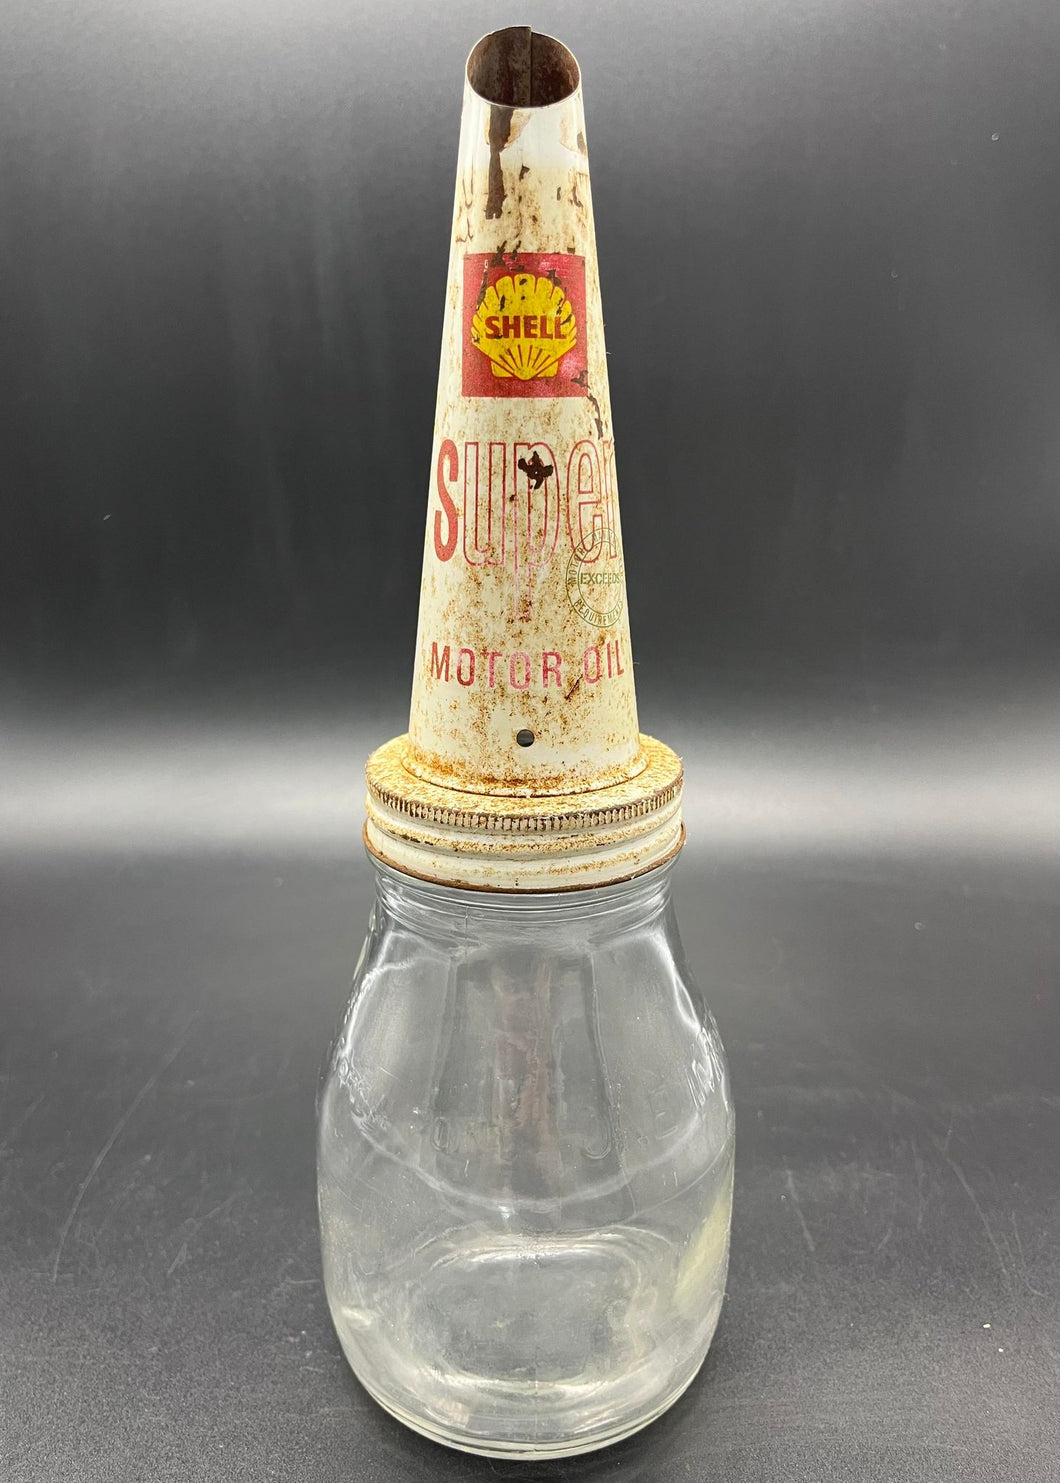 Shell Super Top on Imperial Pint Embossed Bottle